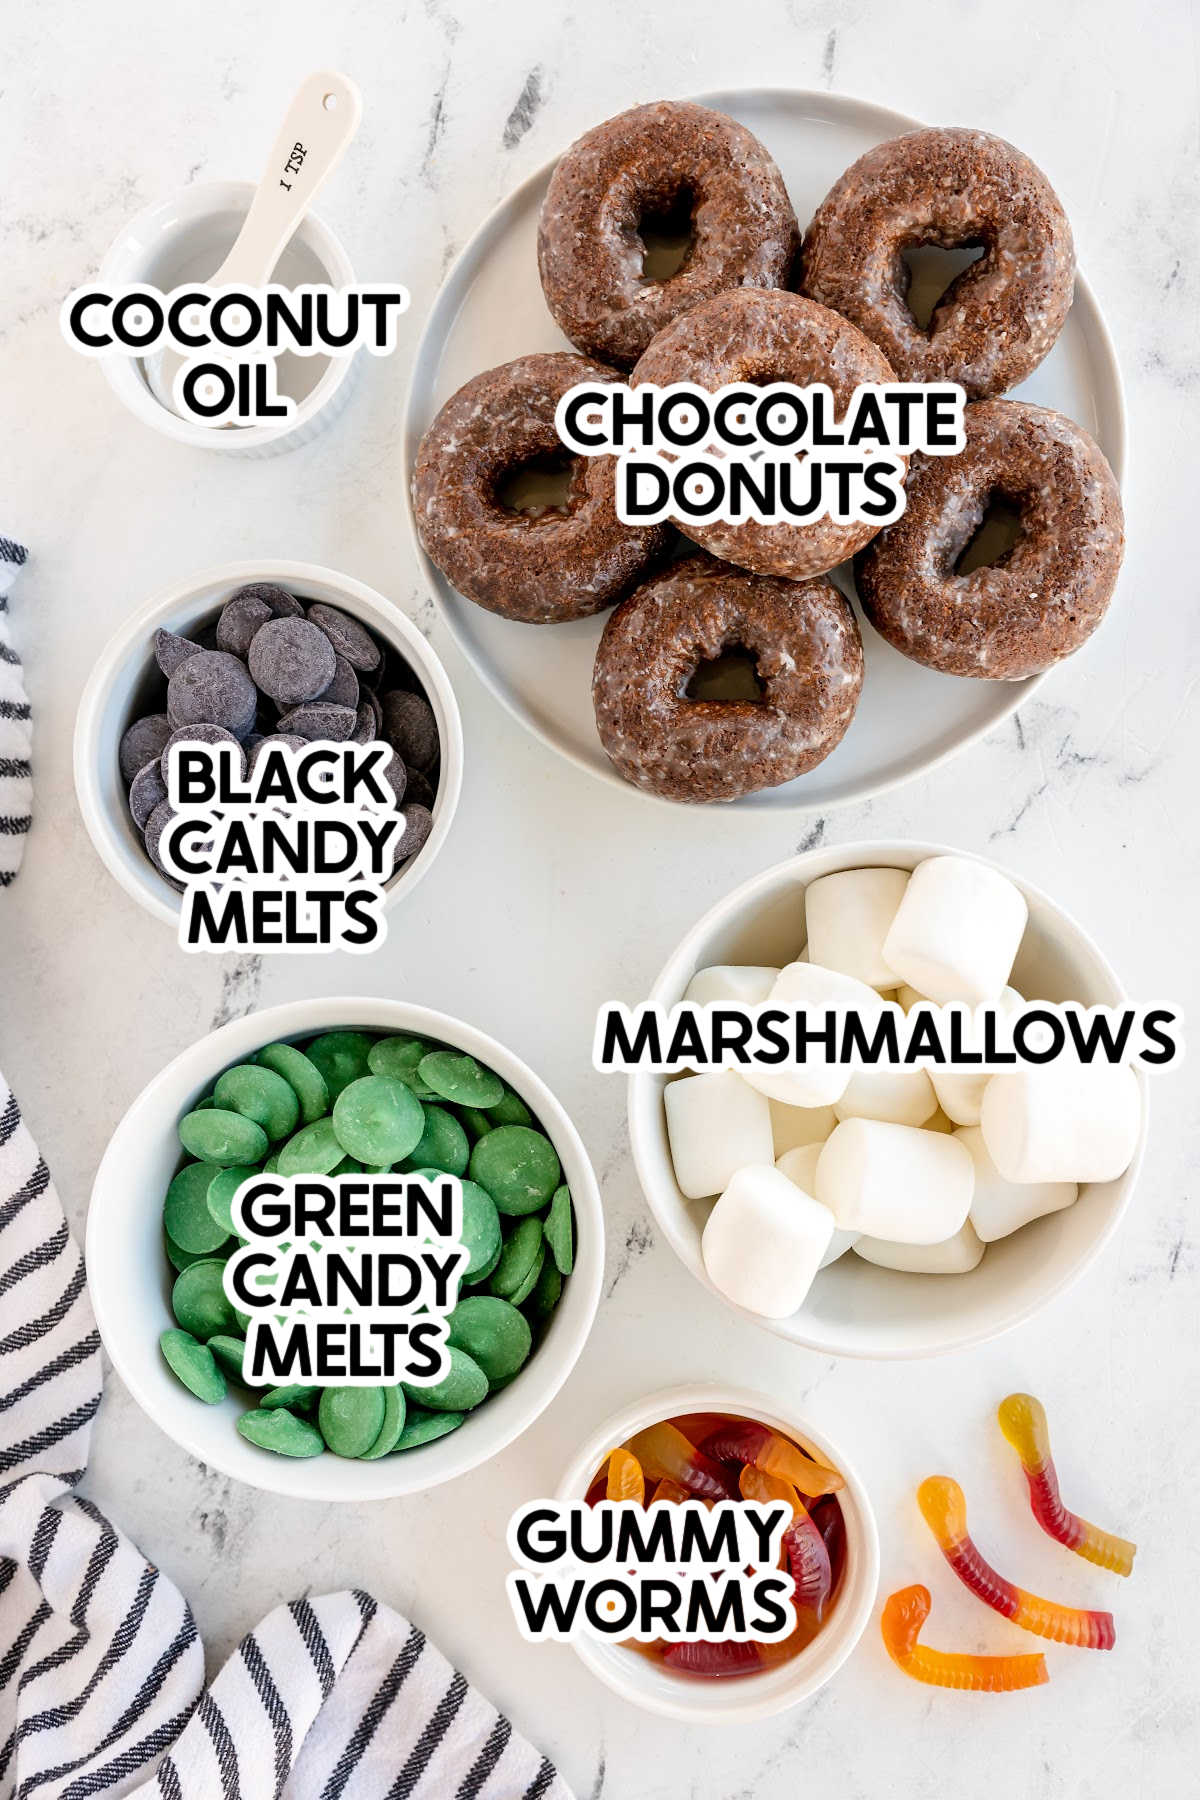 ingredients to make oogie boogie donuts with labels